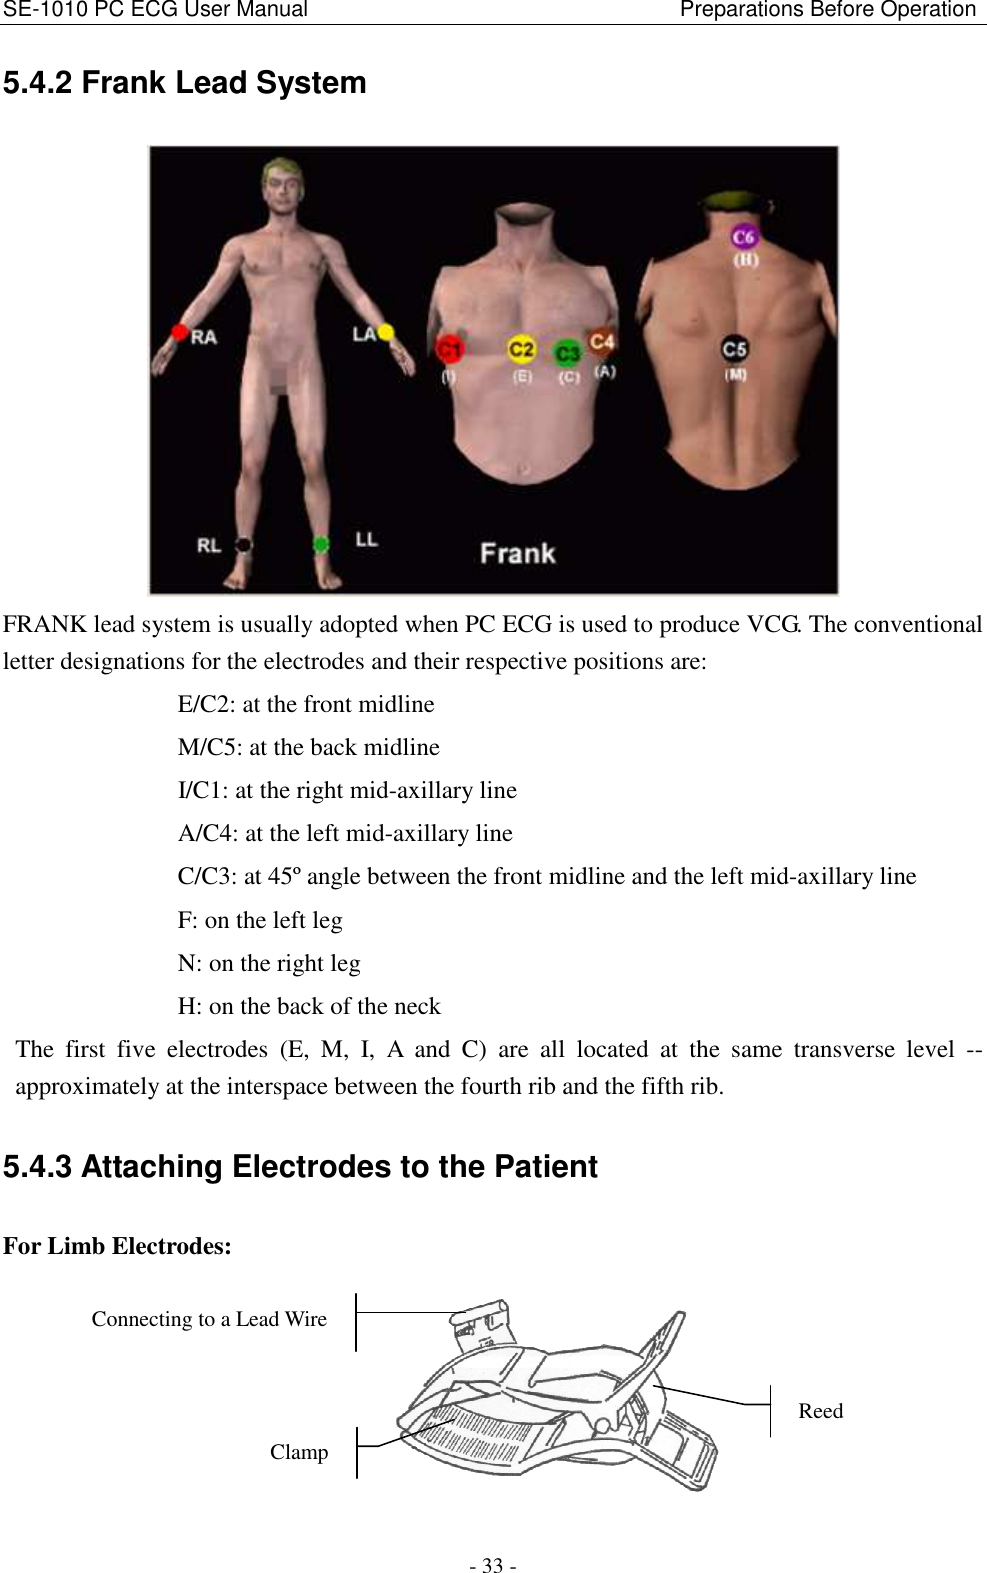 SE-1010 PC ECG User Manual                                                                    Preparations Before Operation - 33 - 5.4.2 Frank Lead System  FRANK lead system is usually adopted when PC ECG is used to produce VCG. The conventional letter designations for the electrodes and their respective positions are:                             E/C2: at the front midline                             M/C5: at the back midline                             I/C1: at the right mid-axillary line                             A/C4: at the left mid-axillary line                             C/C3: at 45º angle between the front midline and the left mid-axillary line                             F: on the left leg                             N: on the right leg                             H: on the back of the neck The  first  five  electrodes  (E,  M,  I,  A  and  C)  are  all  located  at  the  same  transverse  level  -- approximately at the interspace between the fourth rib and the fifth rib. 5.4.3 Attaching Electrodes to the Patient For Limb Electrodes:  Reed Connecting to a Lead Wire Clamp 